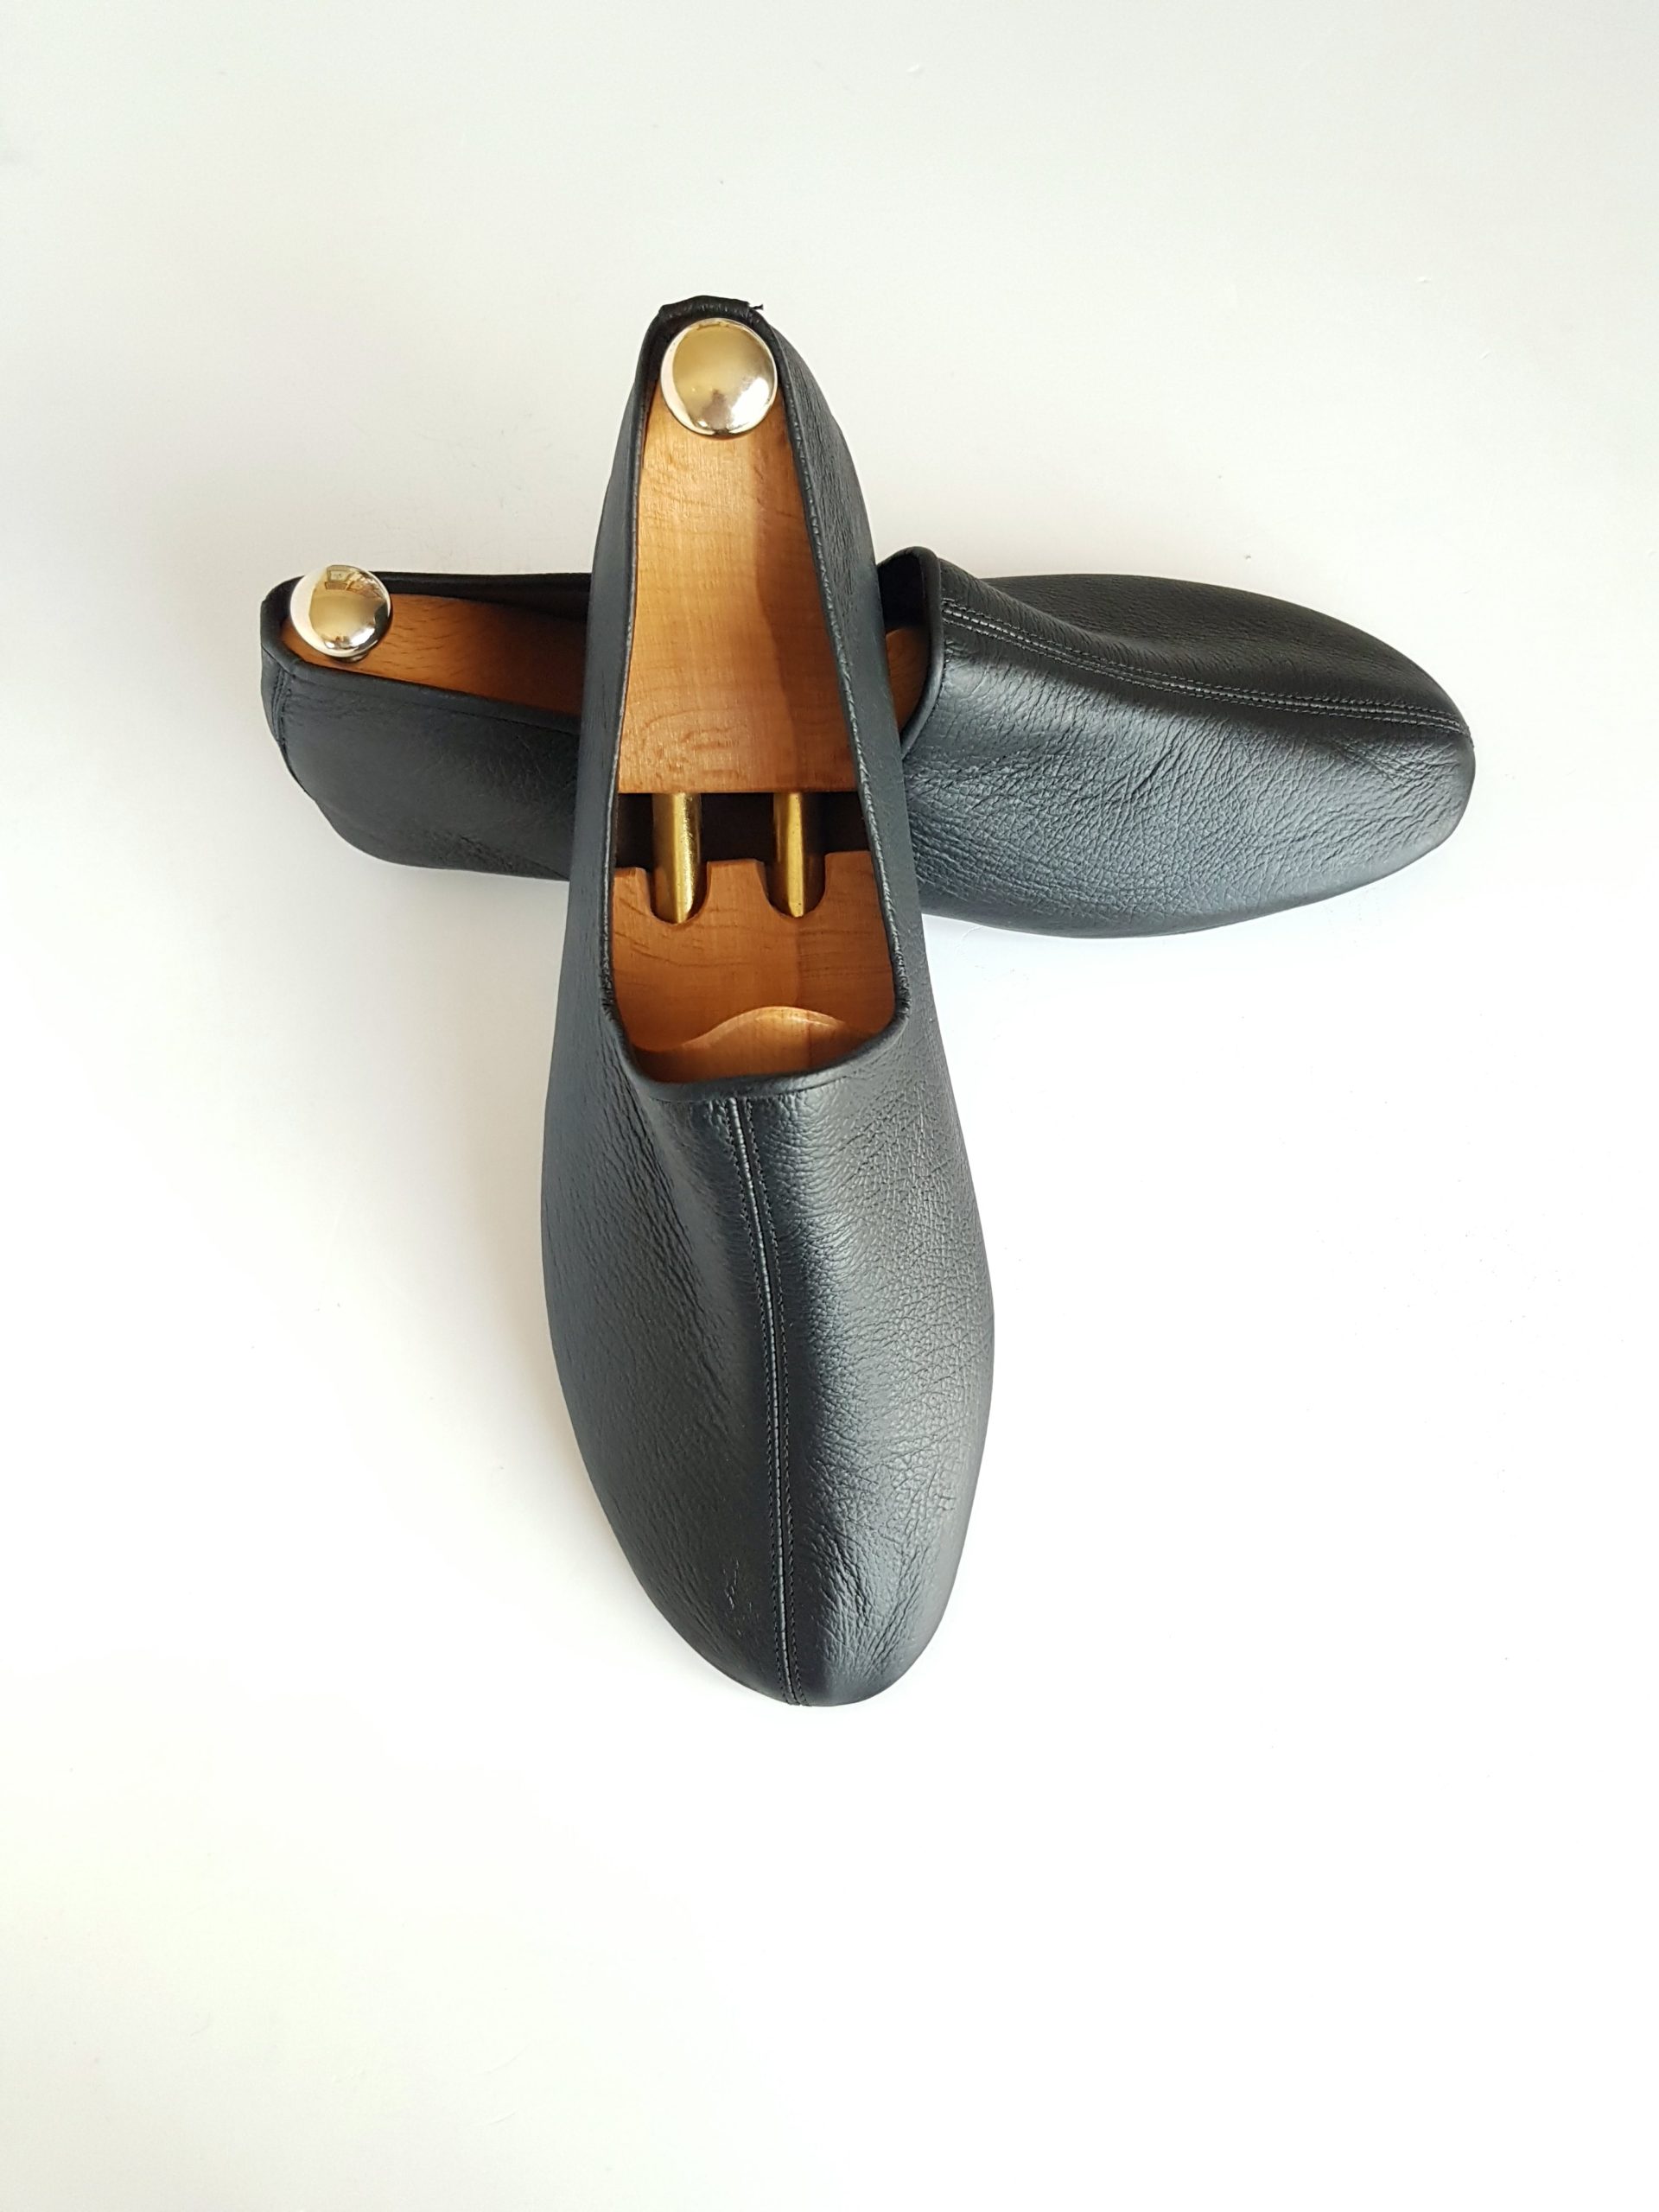 Black leather indoor slipper,dervish shoes – Handcrafted Shoes and Bags